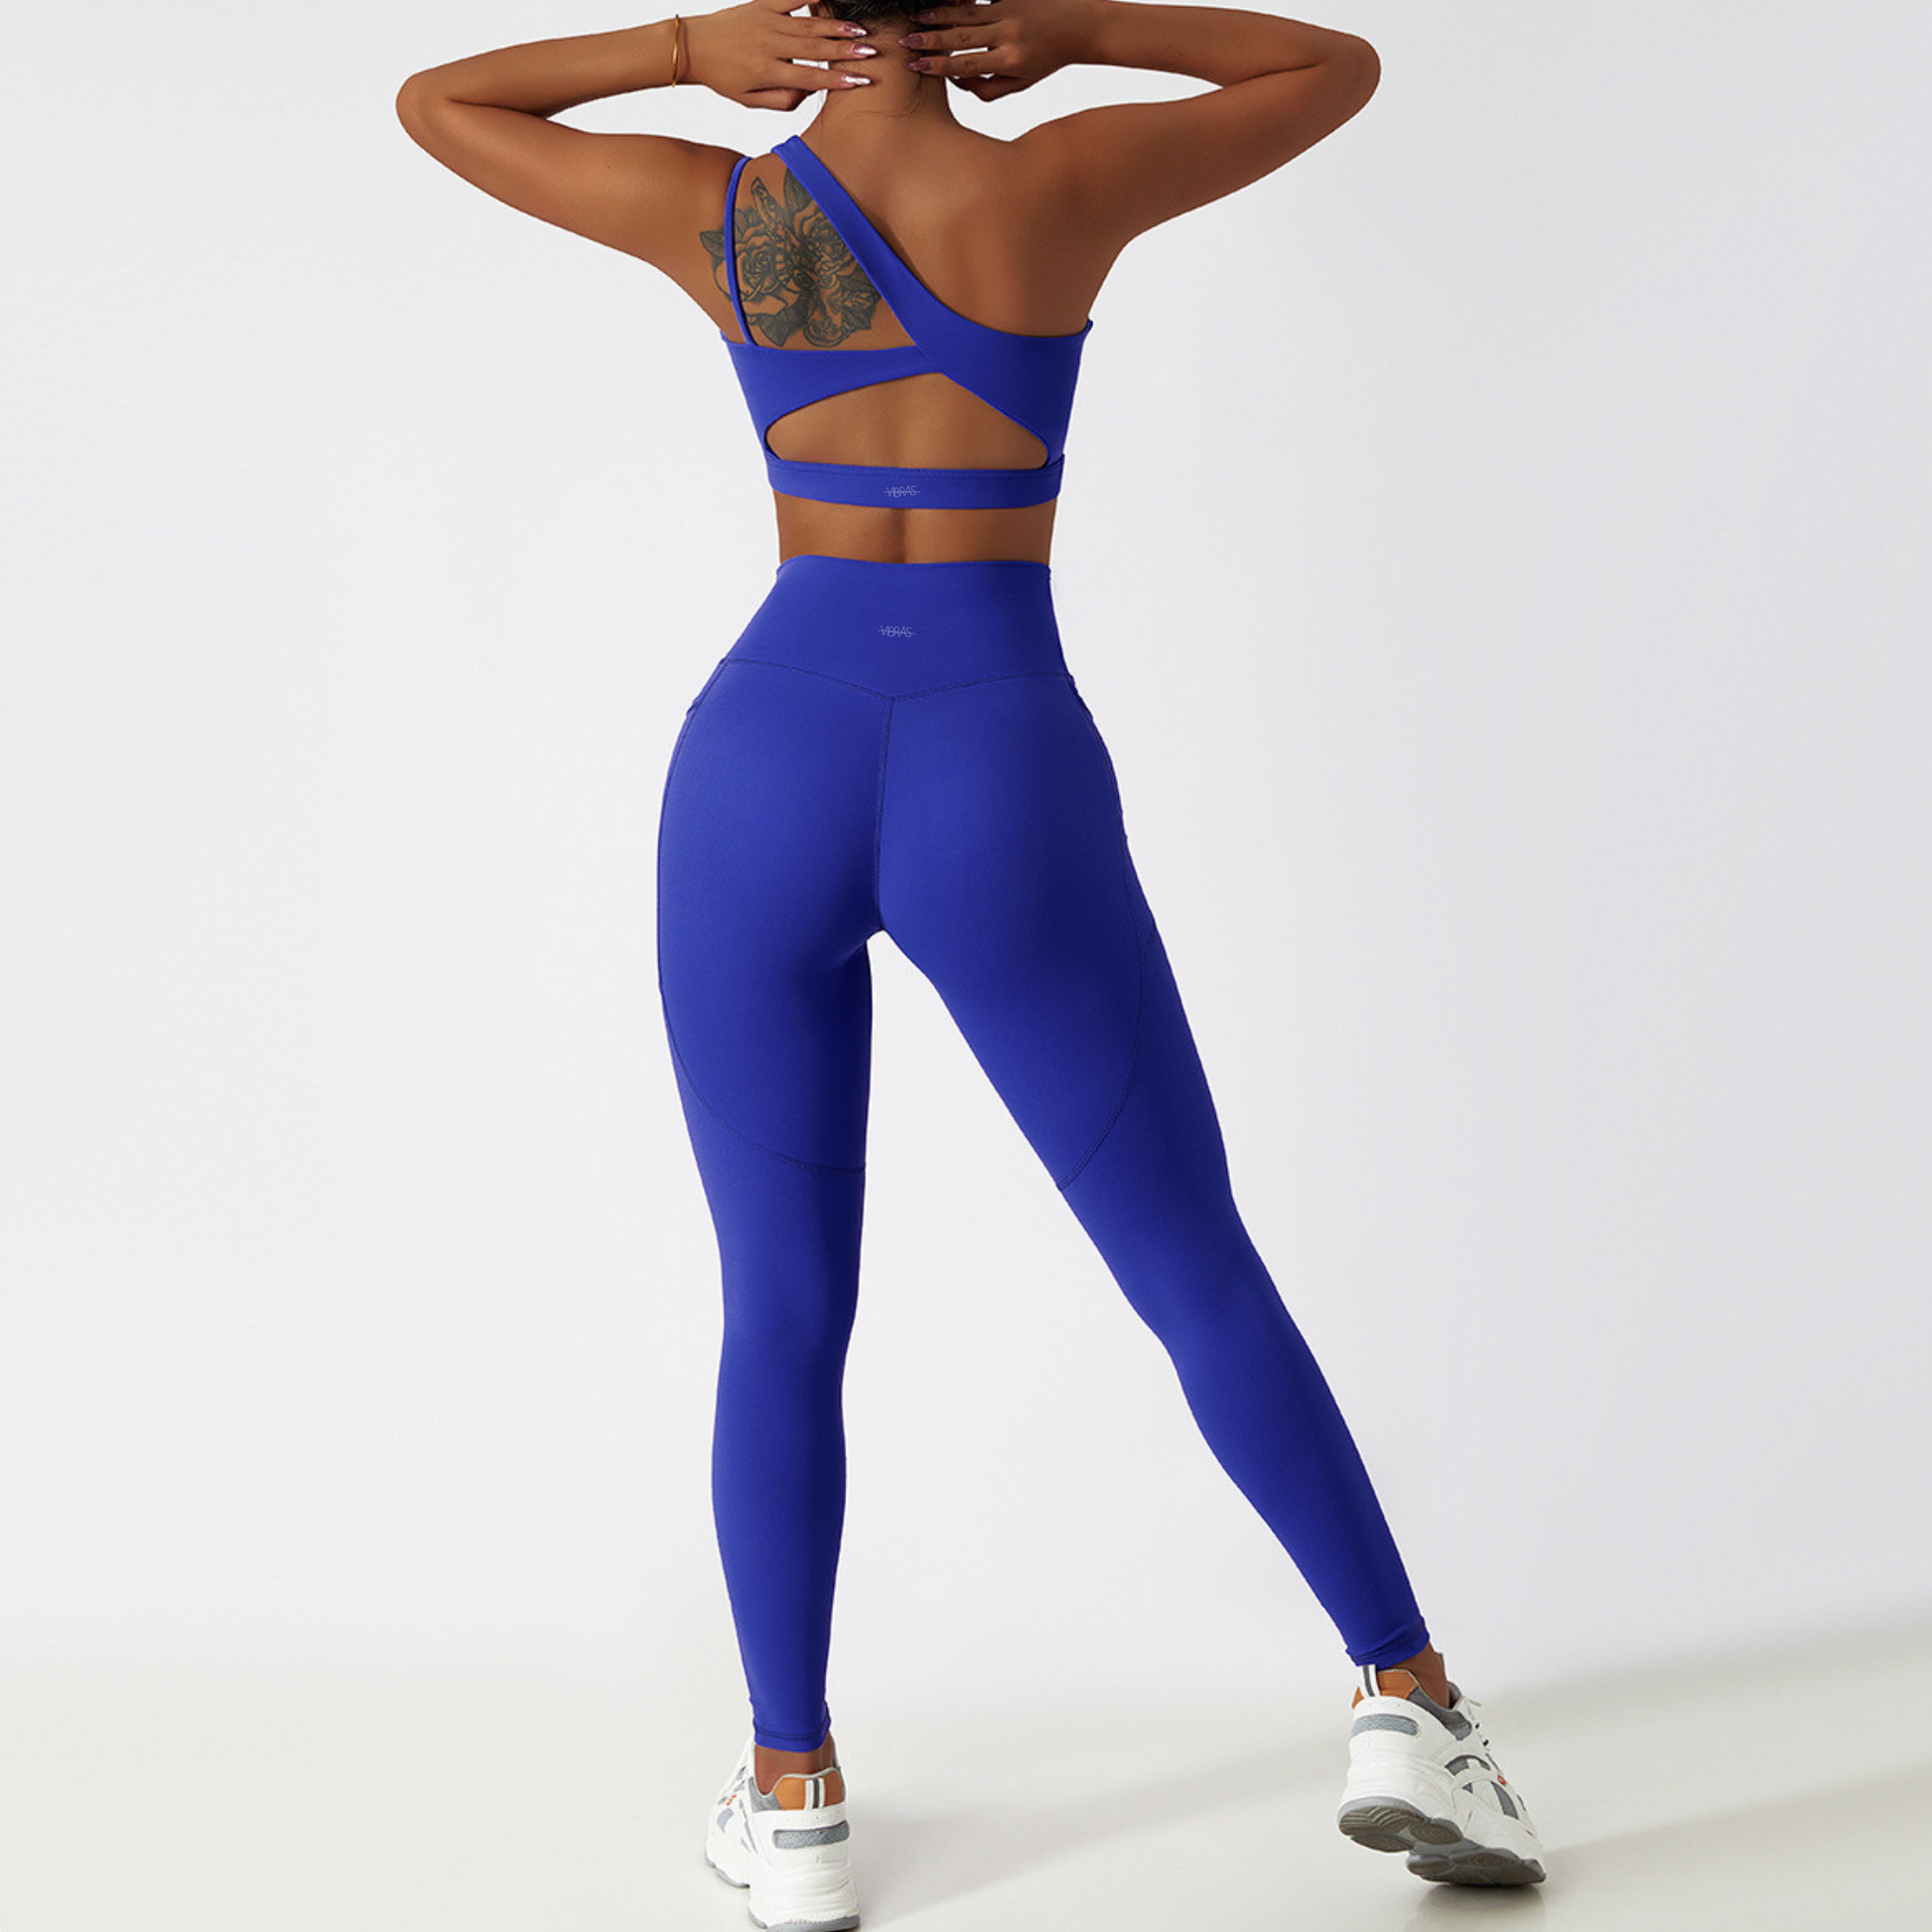 Back view of the sofia matching set in the colour electric blue from vibras activewear.